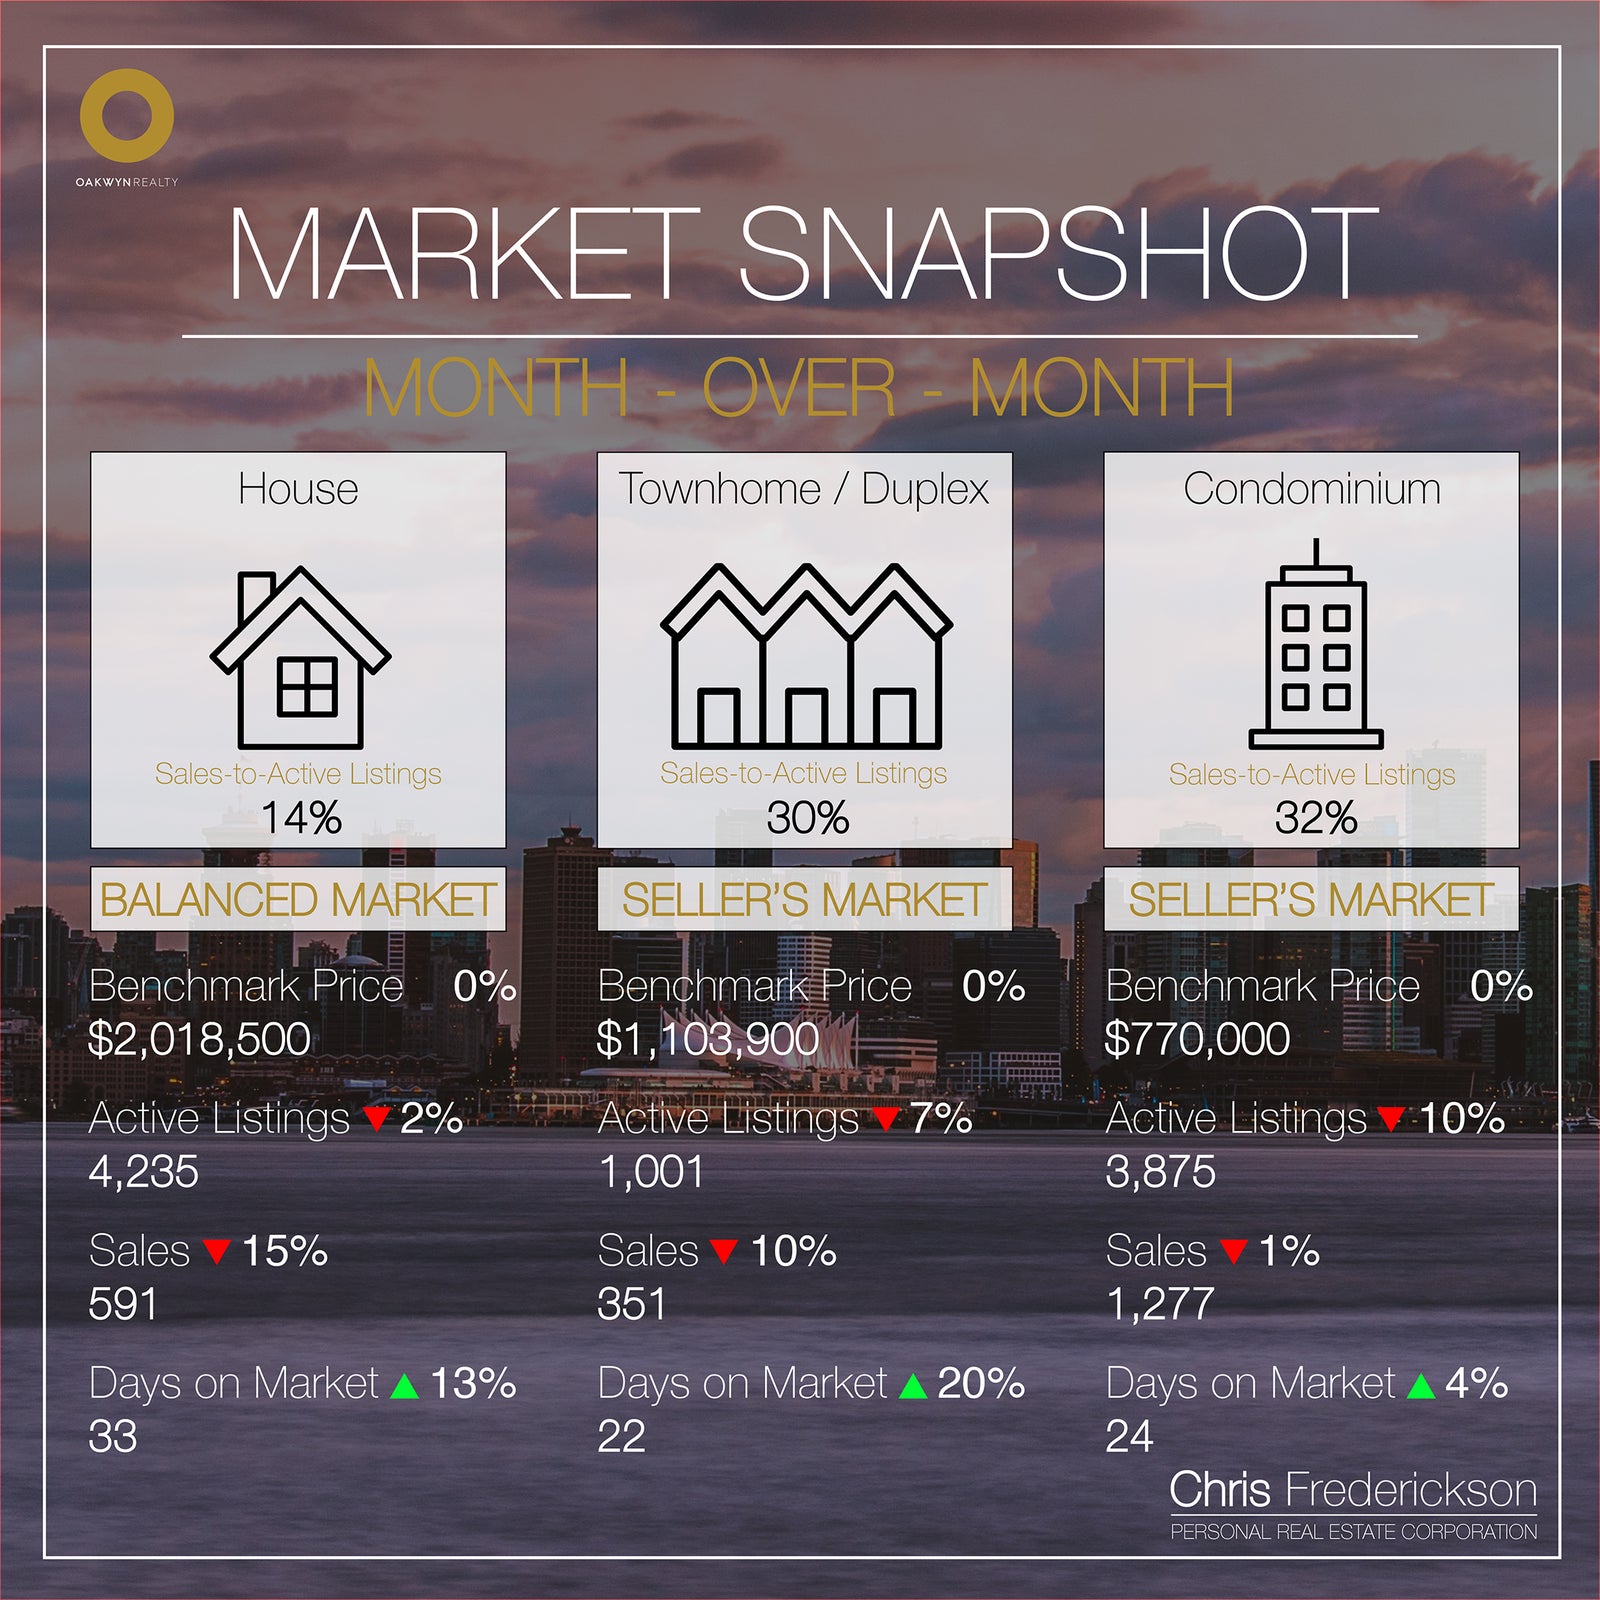 Market Snapshot Month-over-Month Real Estate Vancouver Chris Frederickson